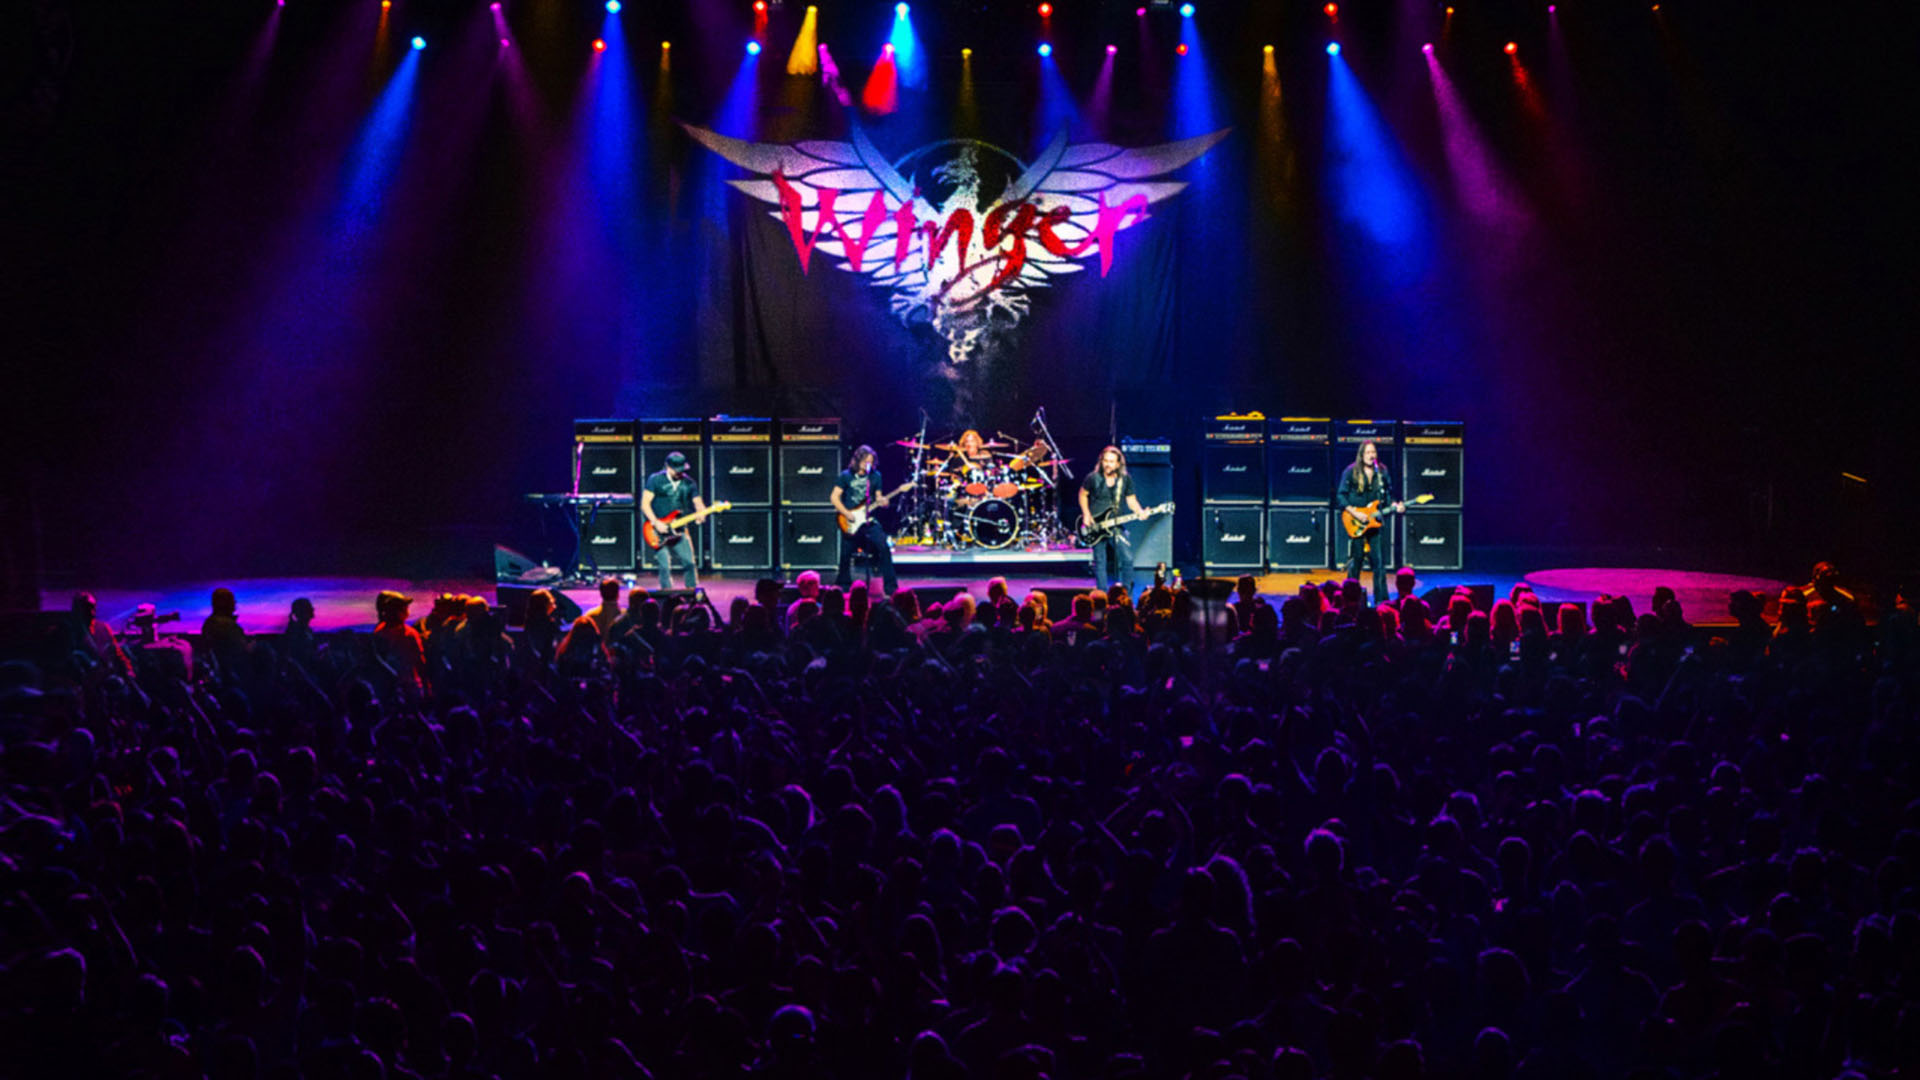 Winger live gig with audience